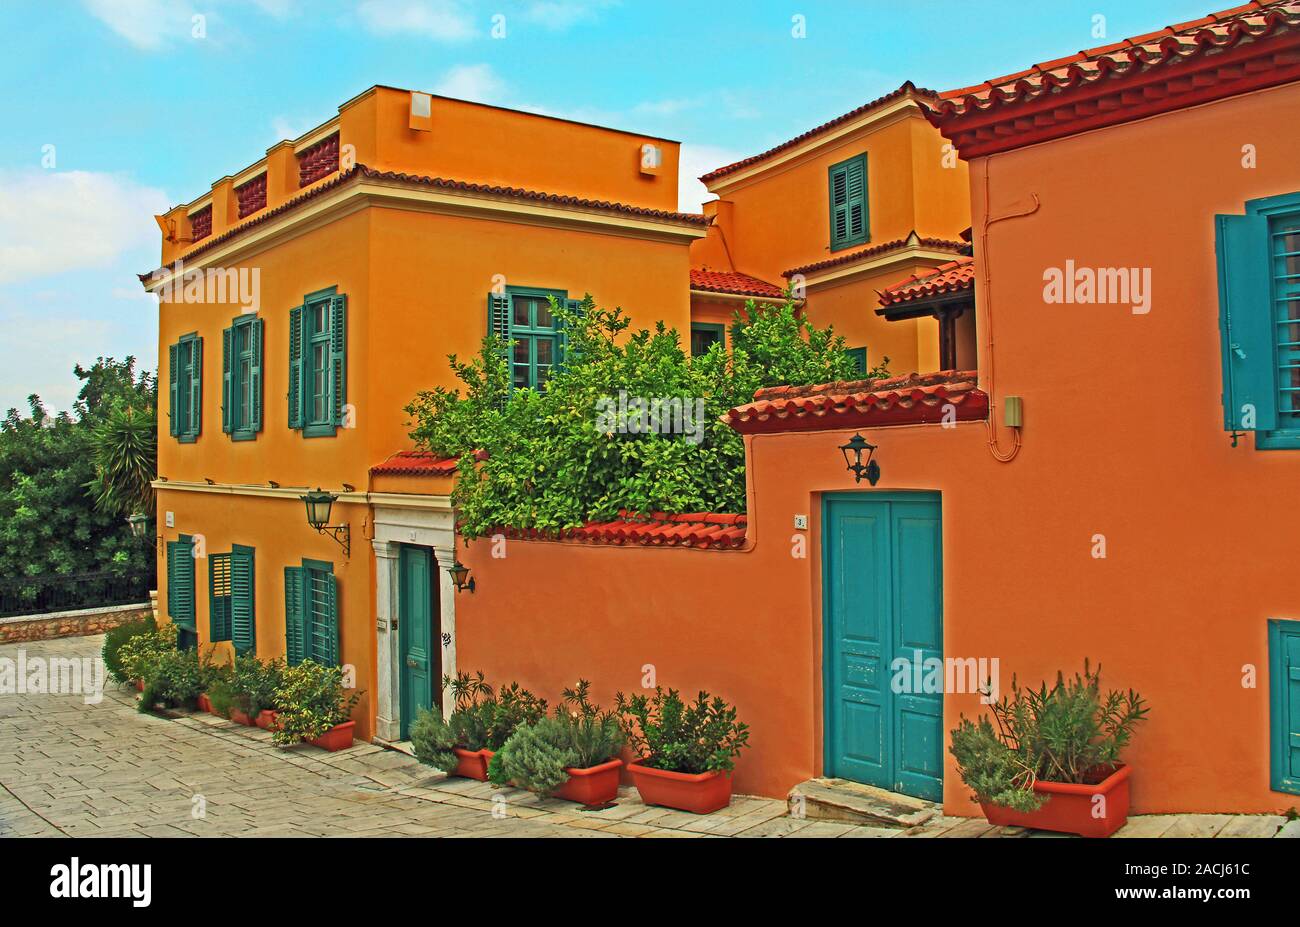 Red Shuttered Home on a Street in Athens, Greece Stock Photo